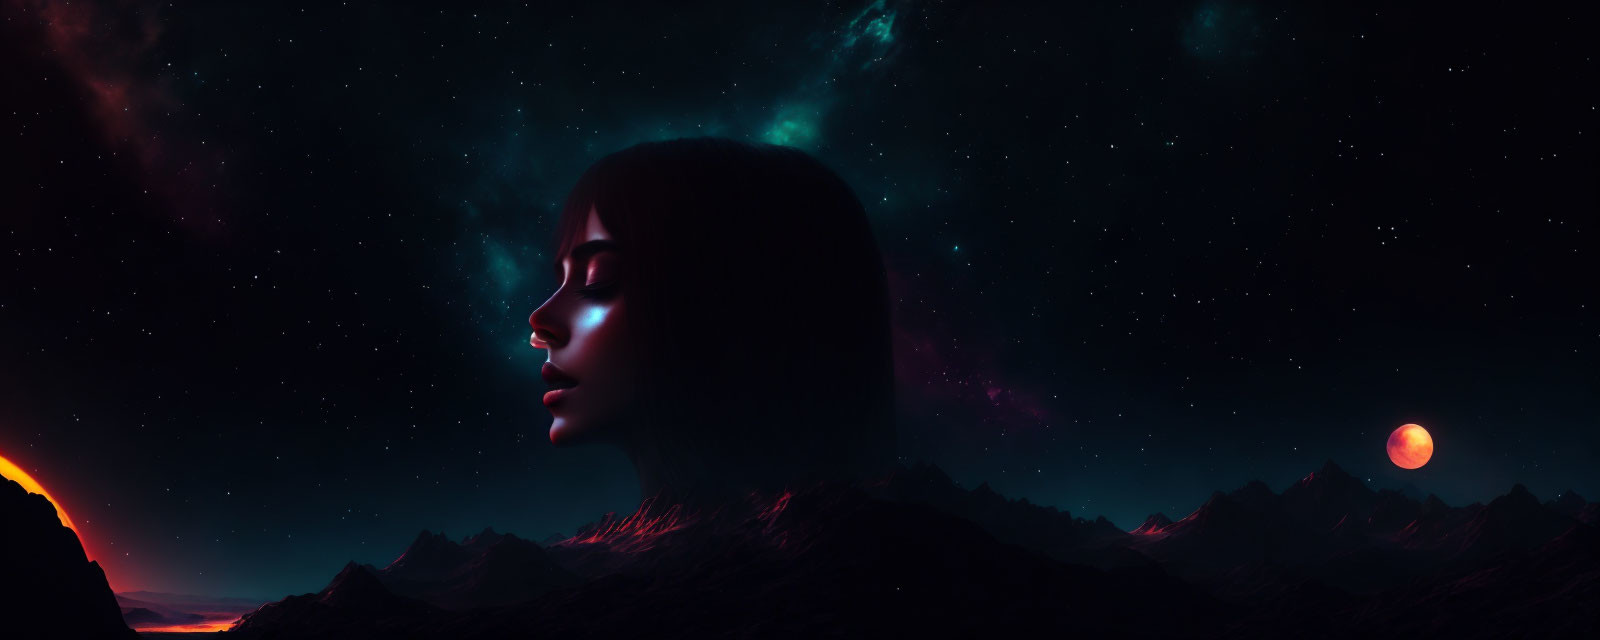 Woman's profile silhouette against cosmic backdrop with starry sky, nebulae, mountains, volcano,